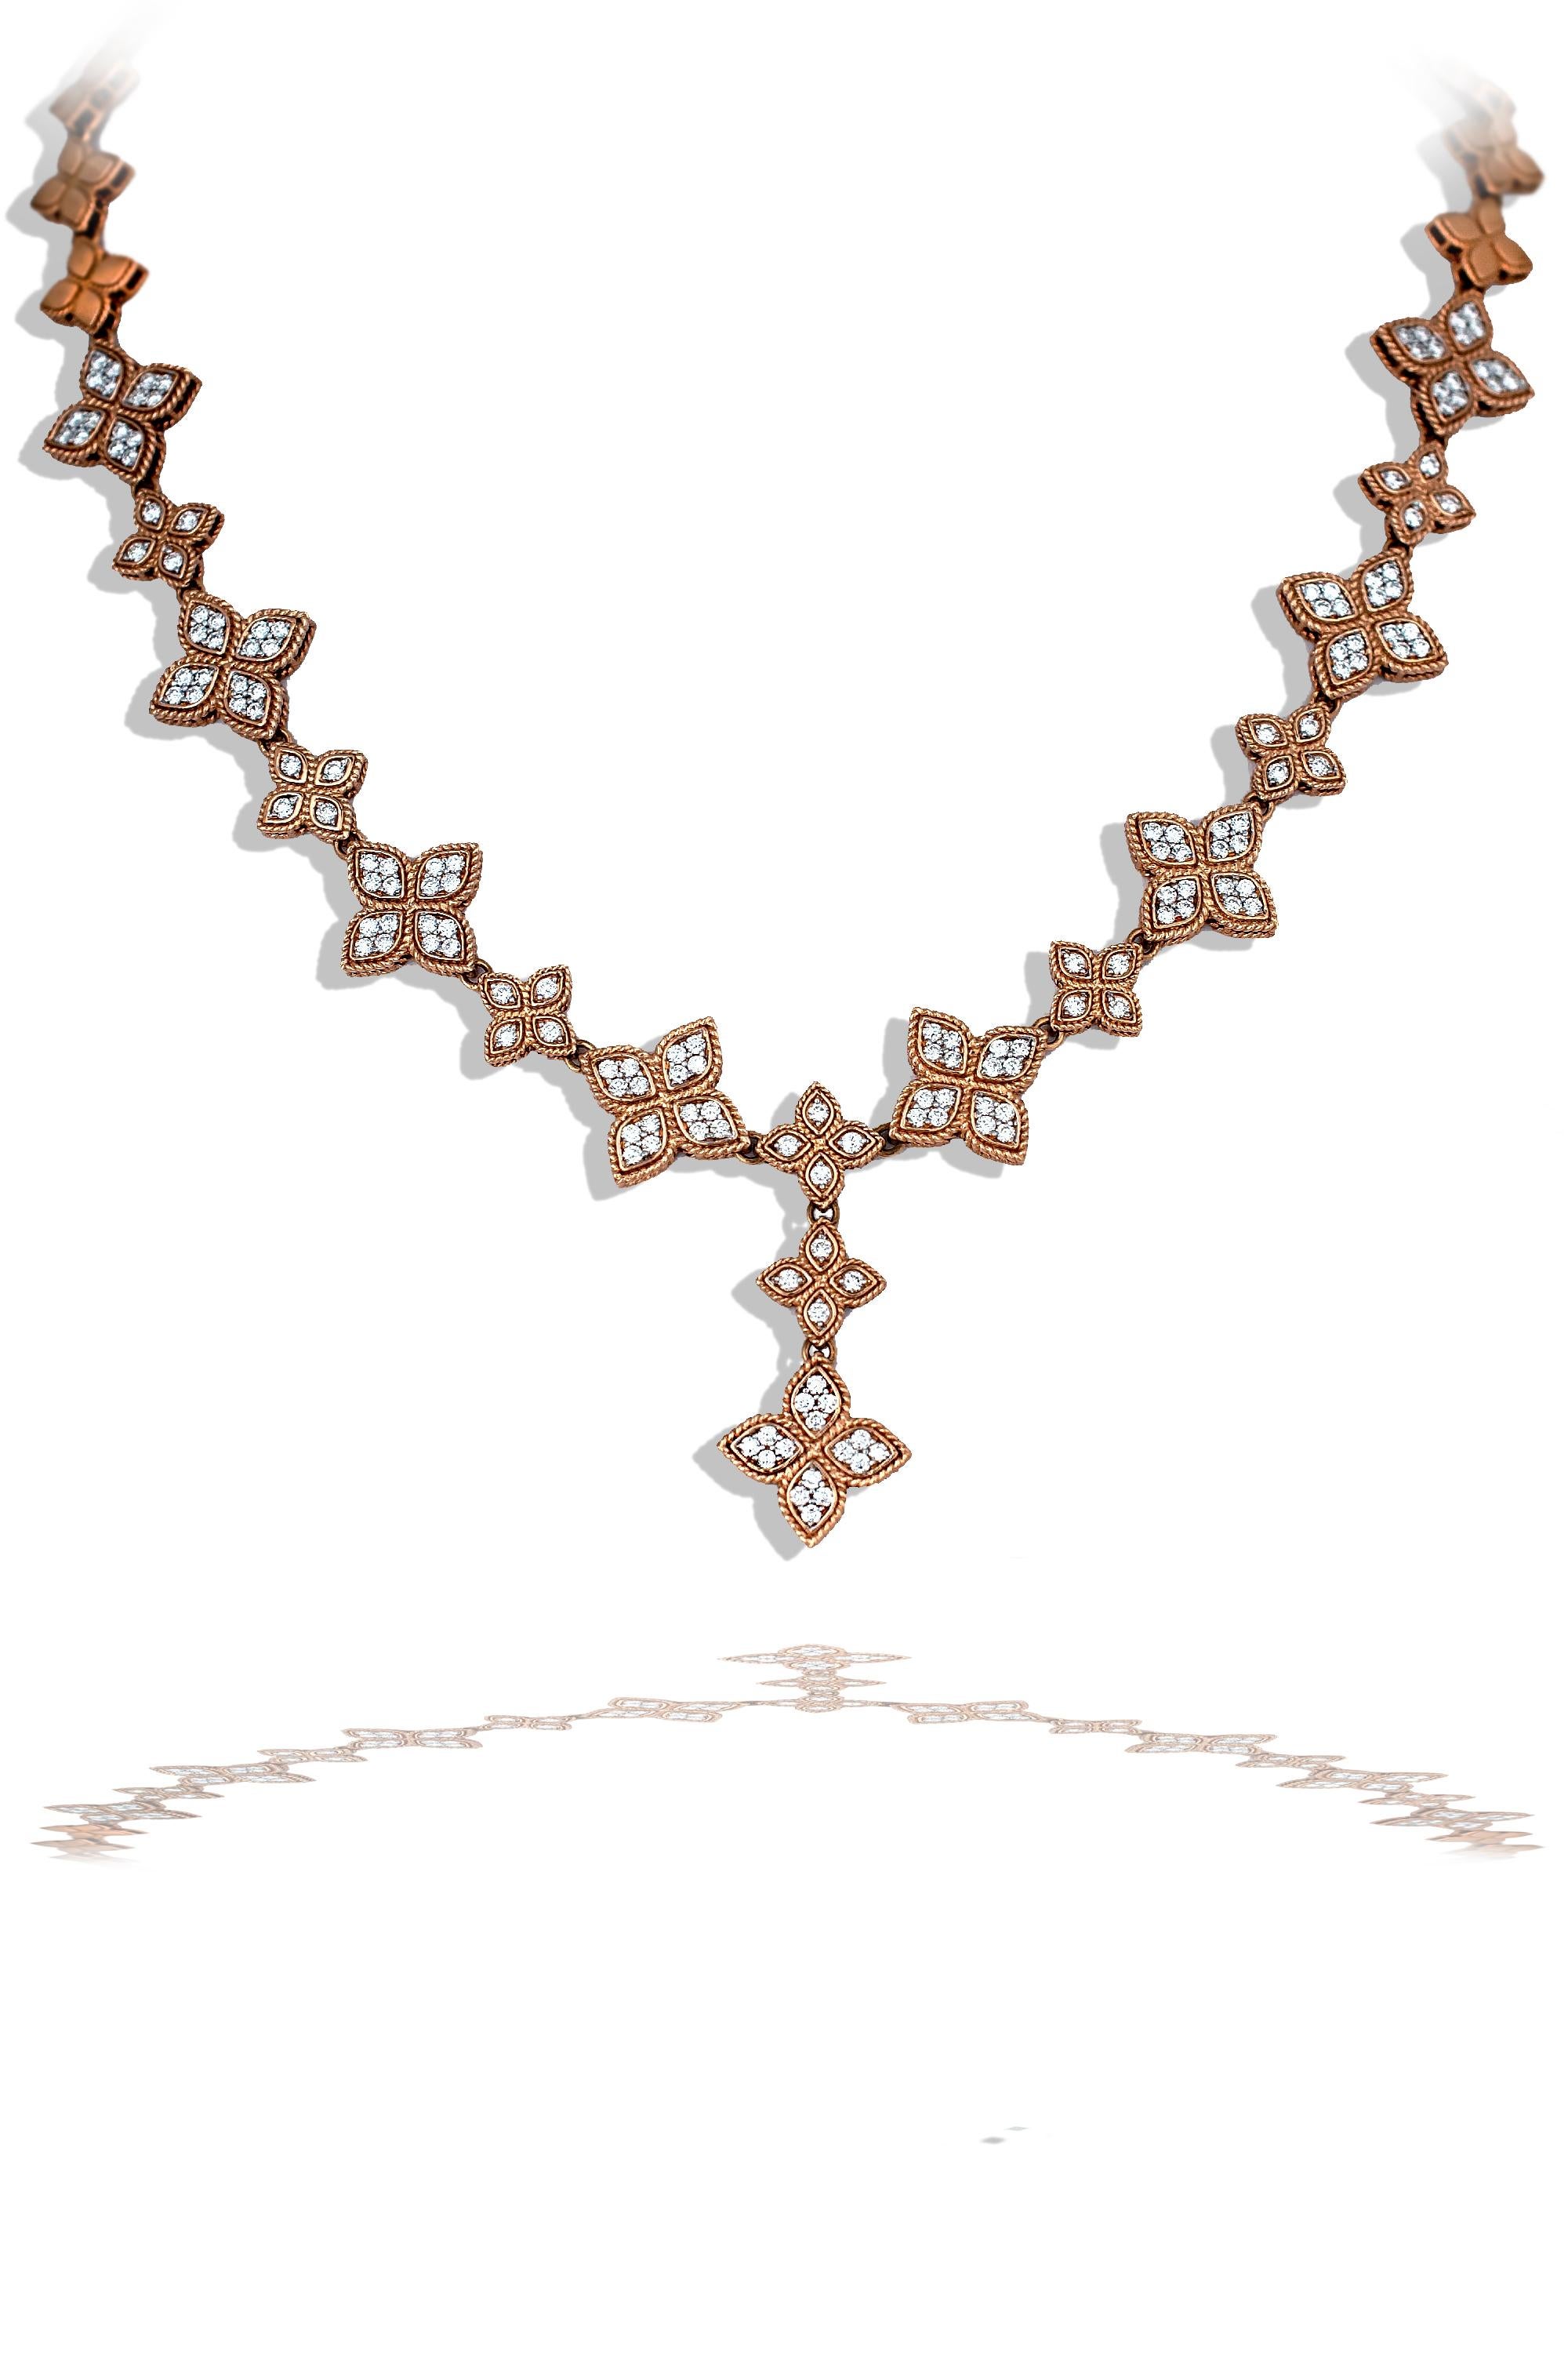 This ladies classic diamond necklace has modern twist on a classic design. This necklace is constructed of 18k rose gold and has seventeen diamond stations.  Each station has an alternating pattern from large to small.  The large stations have